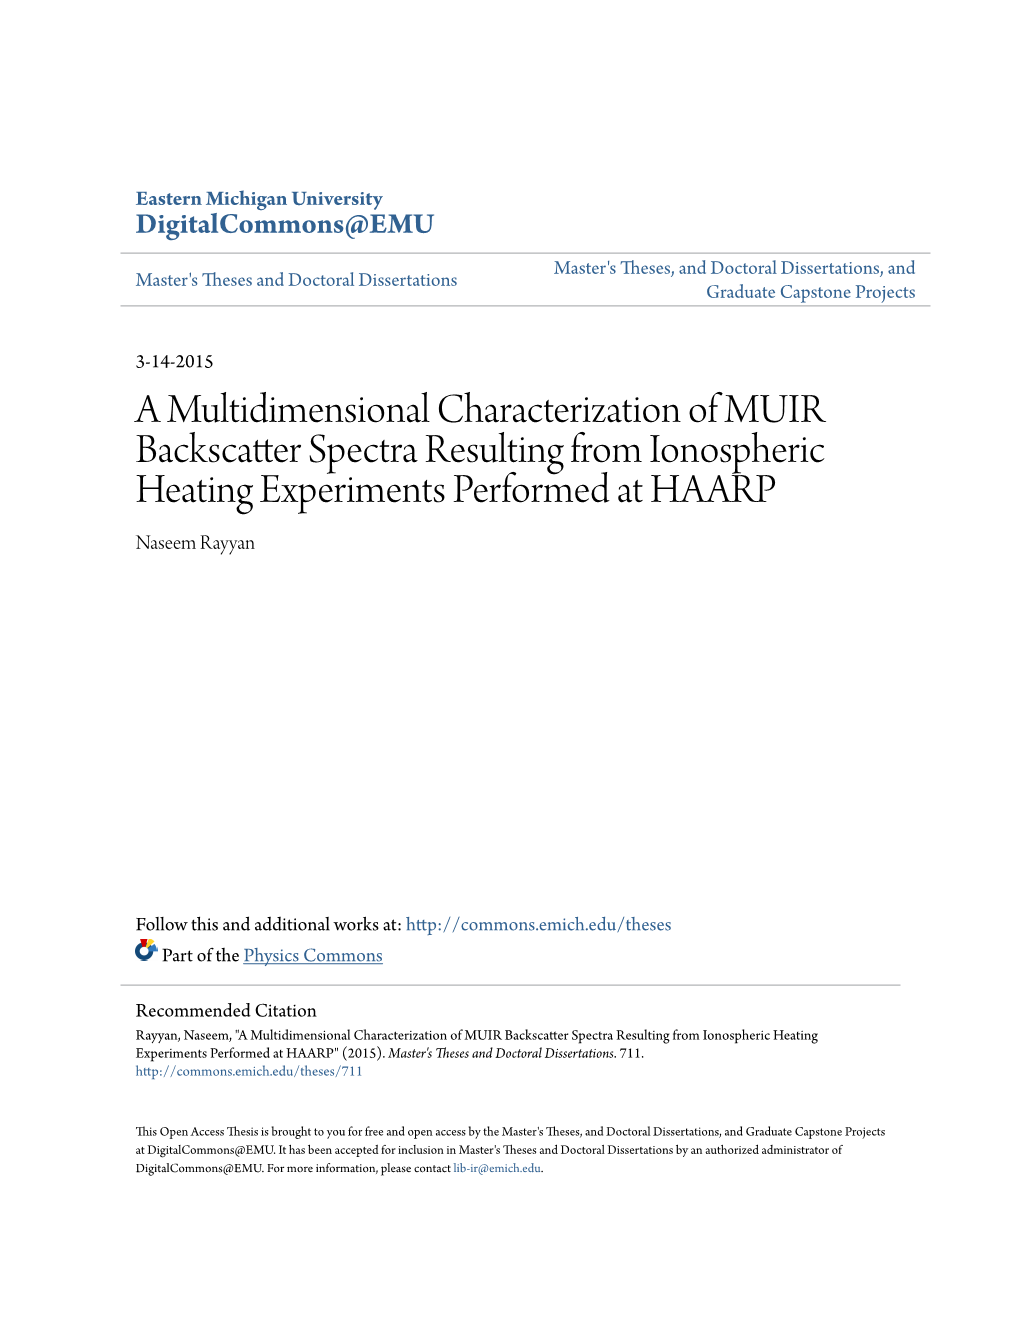 A Multidimensional Characterization of MUIR Backscatter Spectra Resulting from Ionospheric Heating Experiments Performed at HAARP Naseem Rayyan